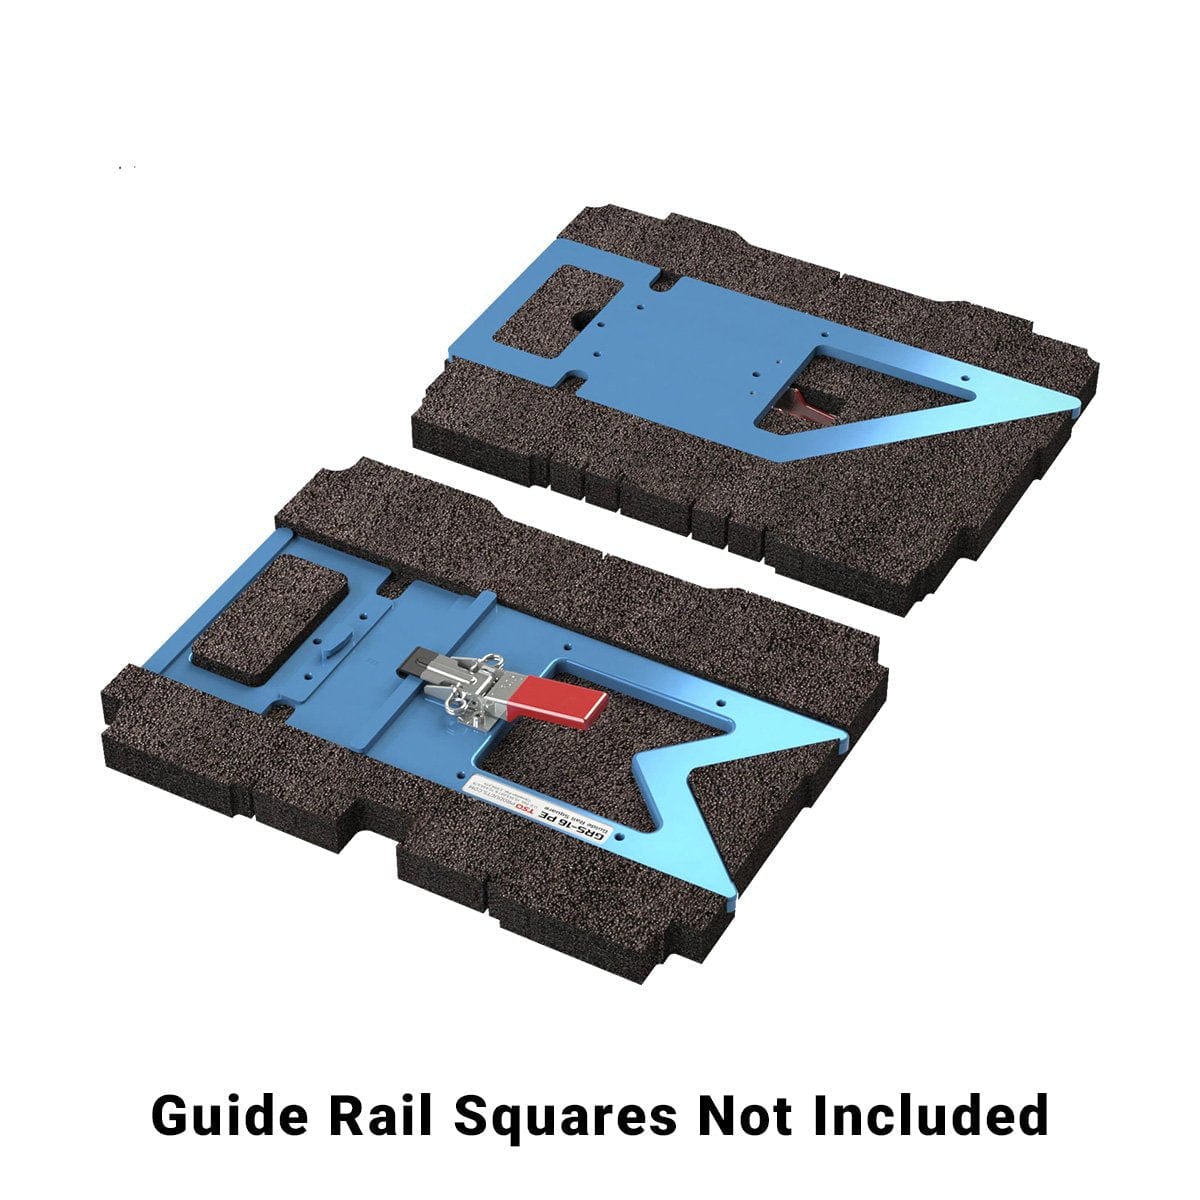 TSO Products 61-244 A Guide Rail Accessory Systainer Insert Set for GRS-16 Guide Rail Squares